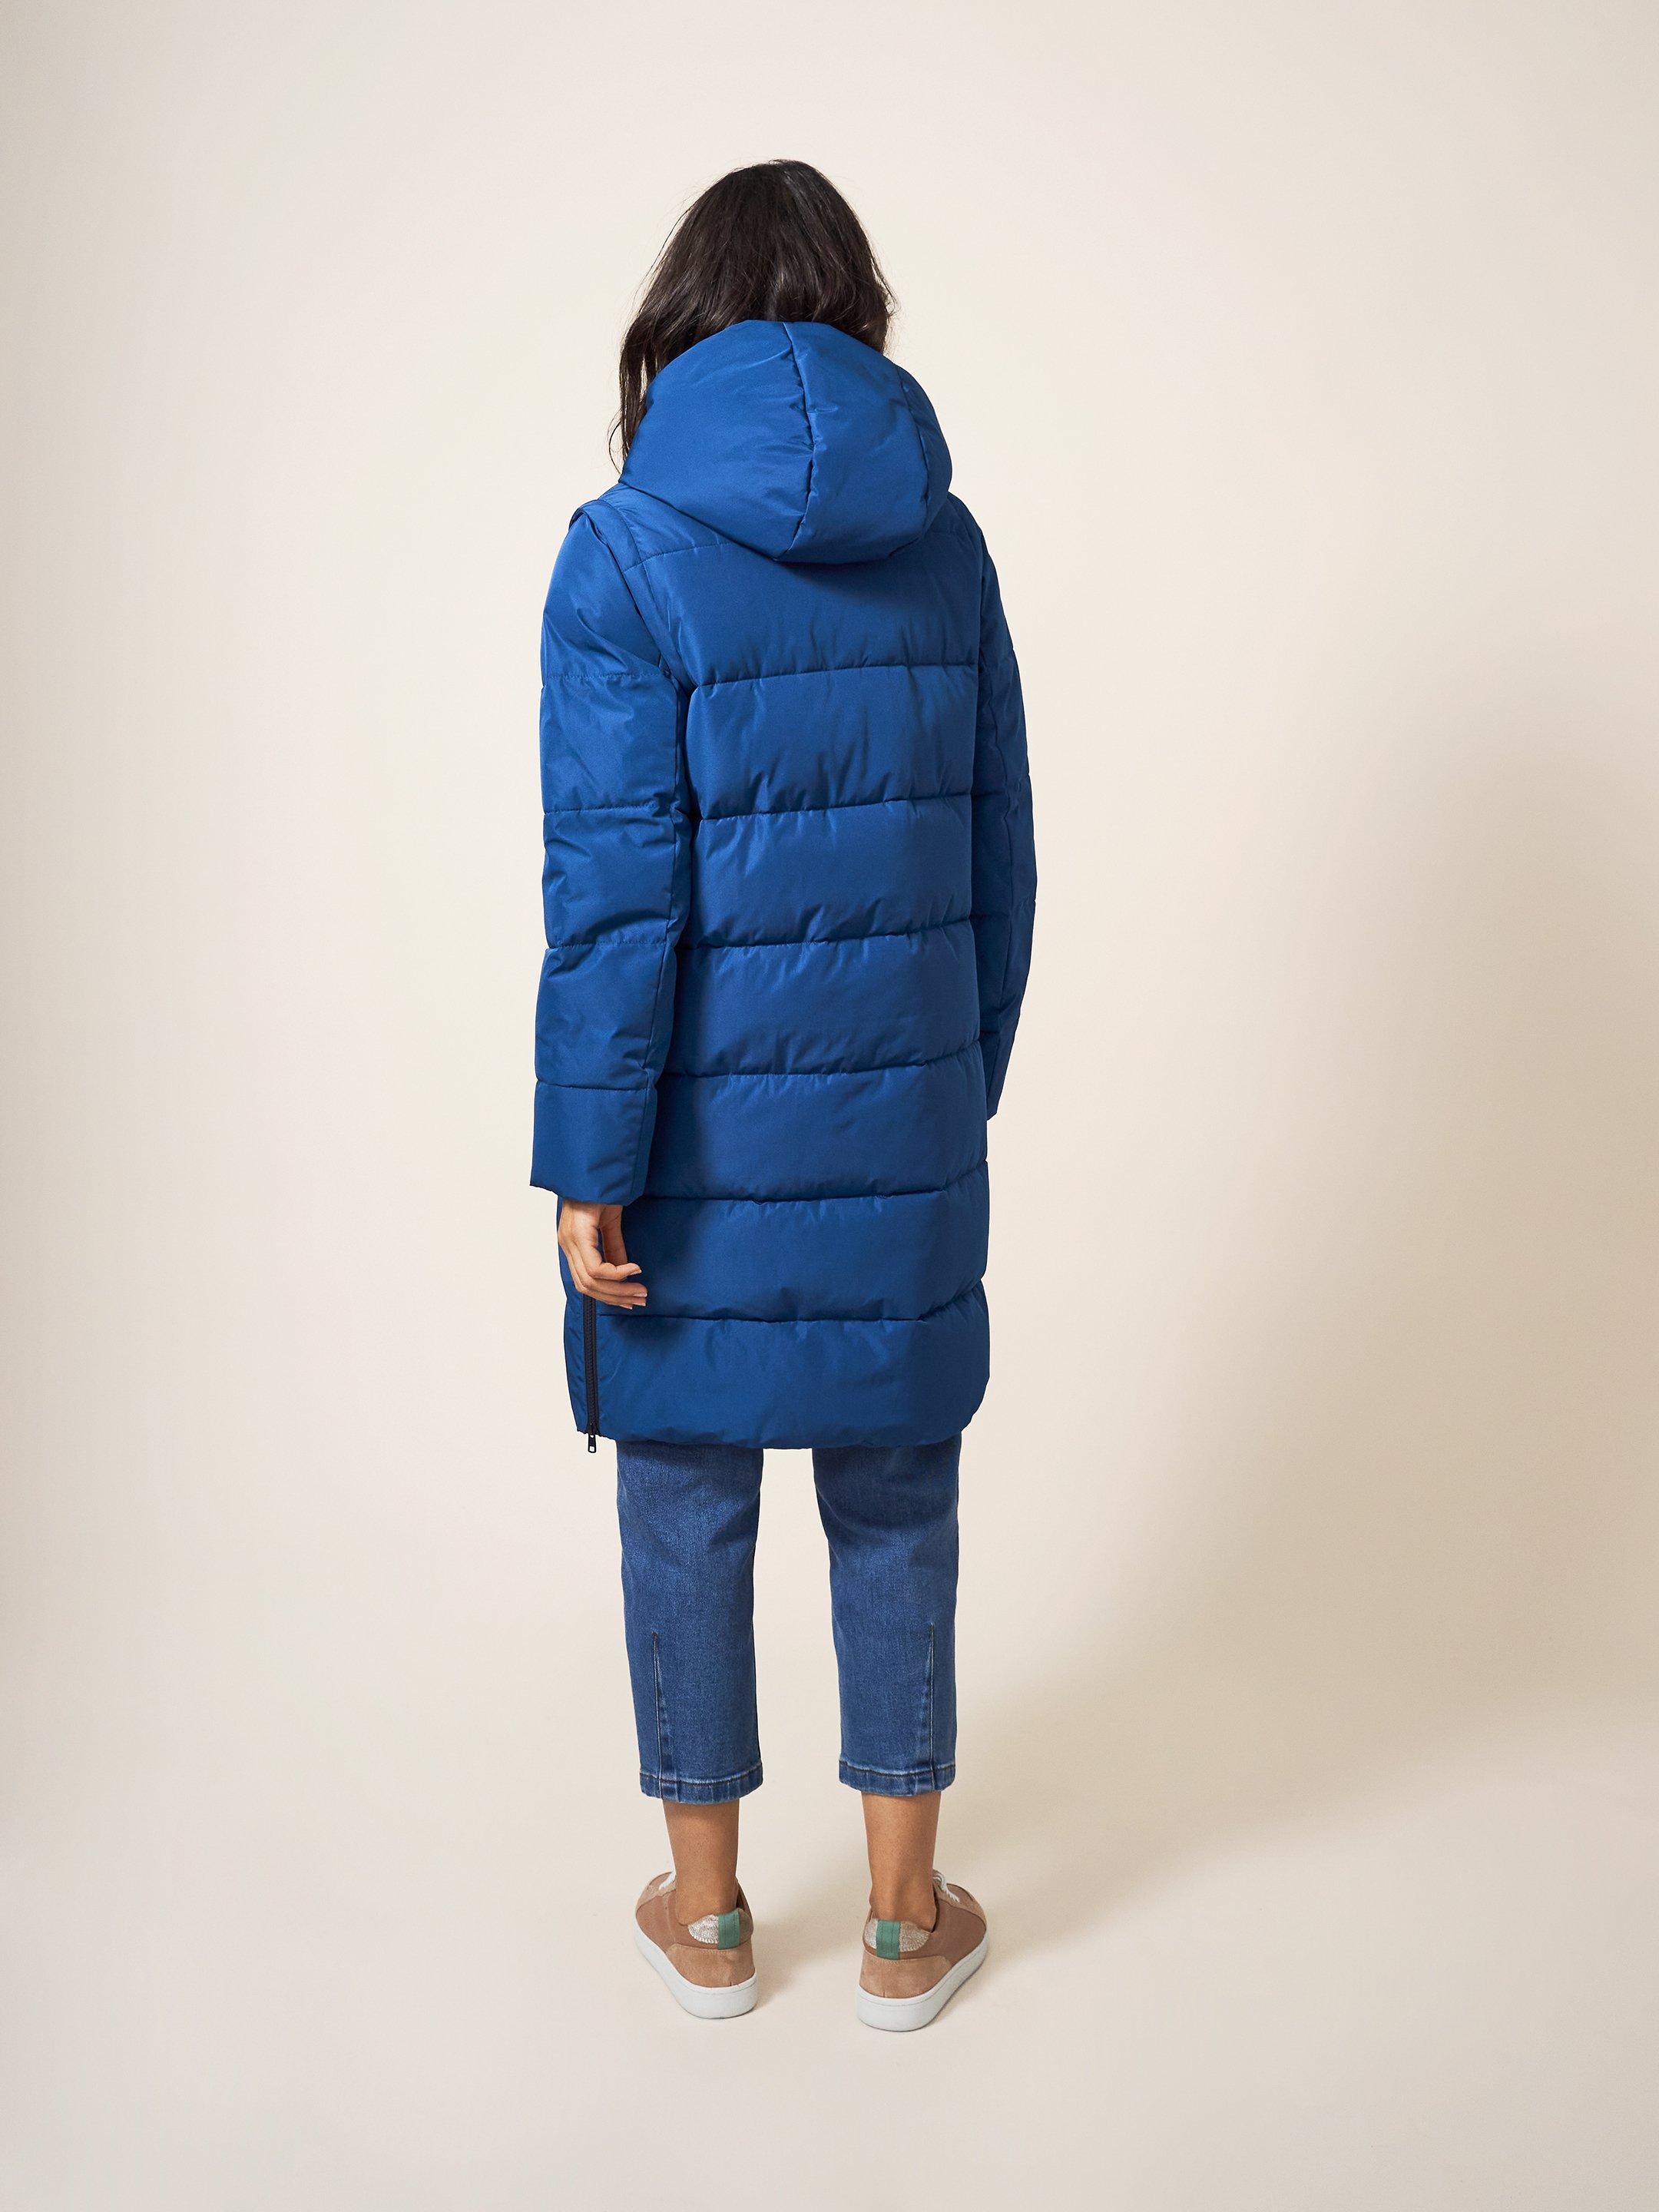 Dania Multiway Quilted Coat in BLUE MLT - MODEL BACK